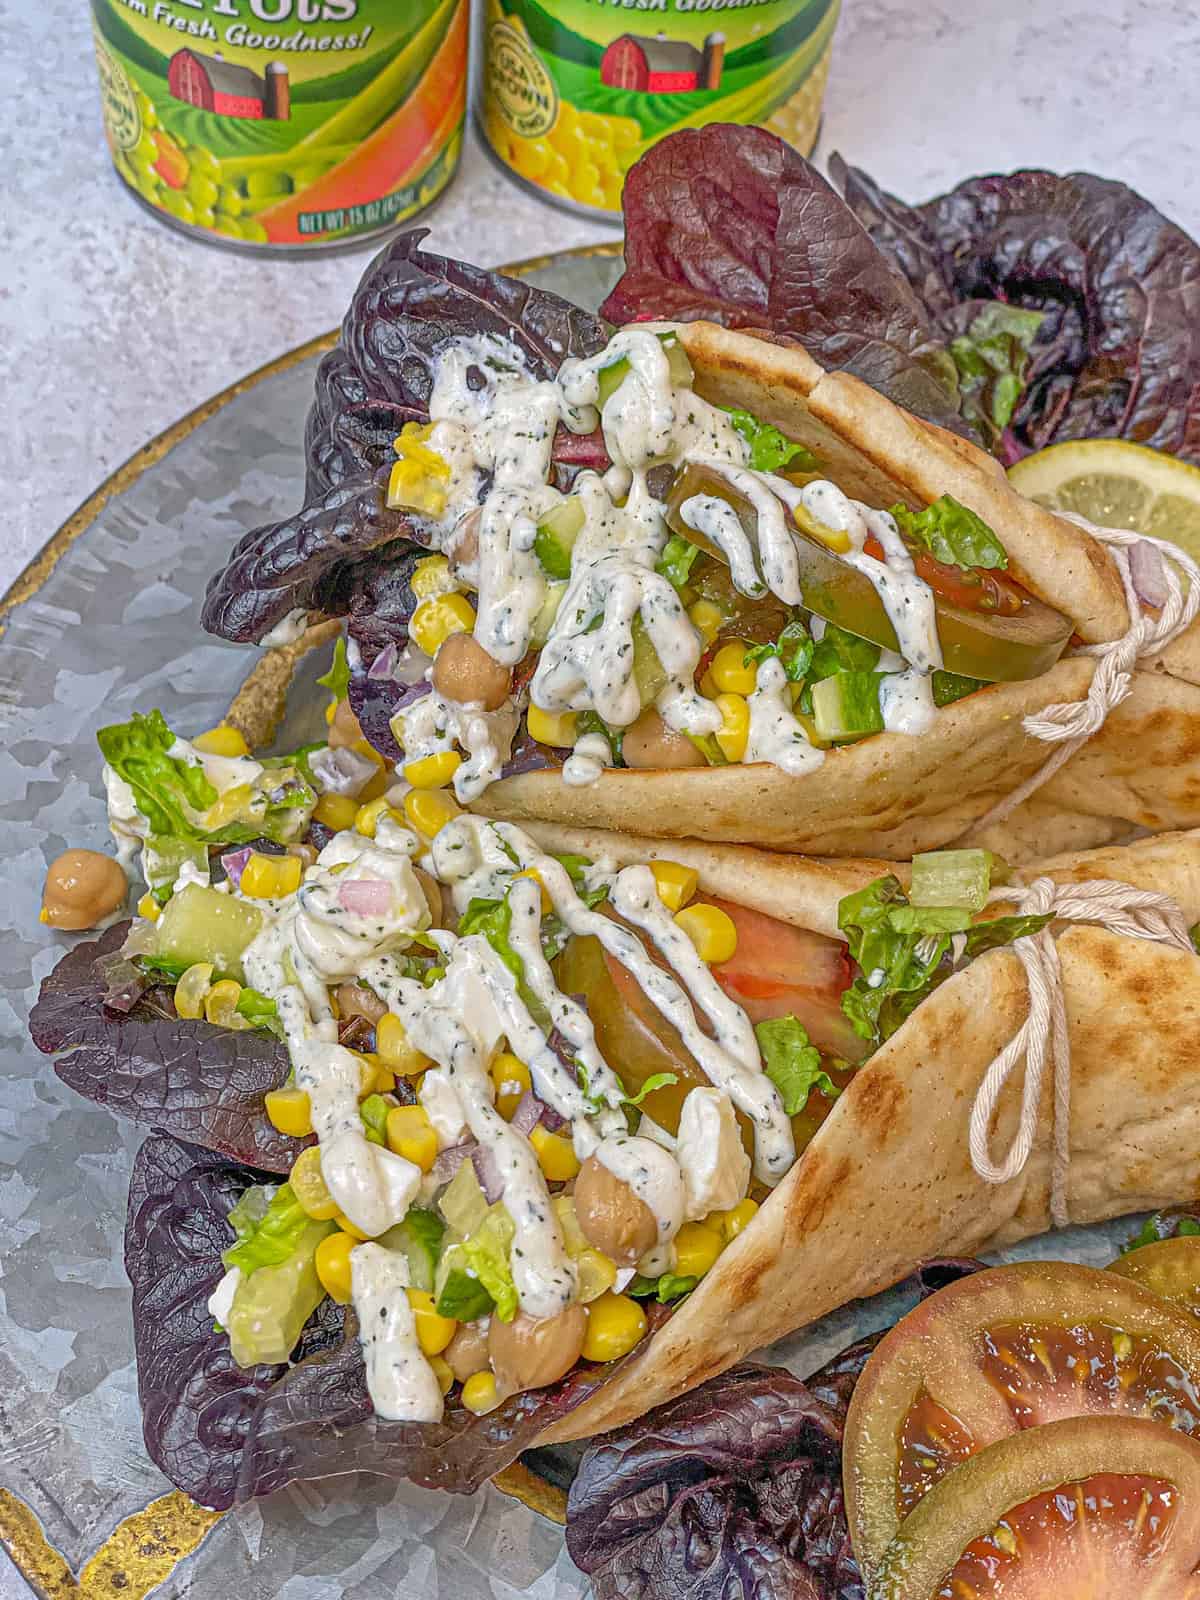 Two pitas stuffed with Mediterranean salad and tied in a beautiful knot. The sandwiches show the ingredients of the salad which are chopped cucumbers, corn, chickpeas, lettuce, and tomatoes, all drizzled with a delicious Mediterranean dressing.